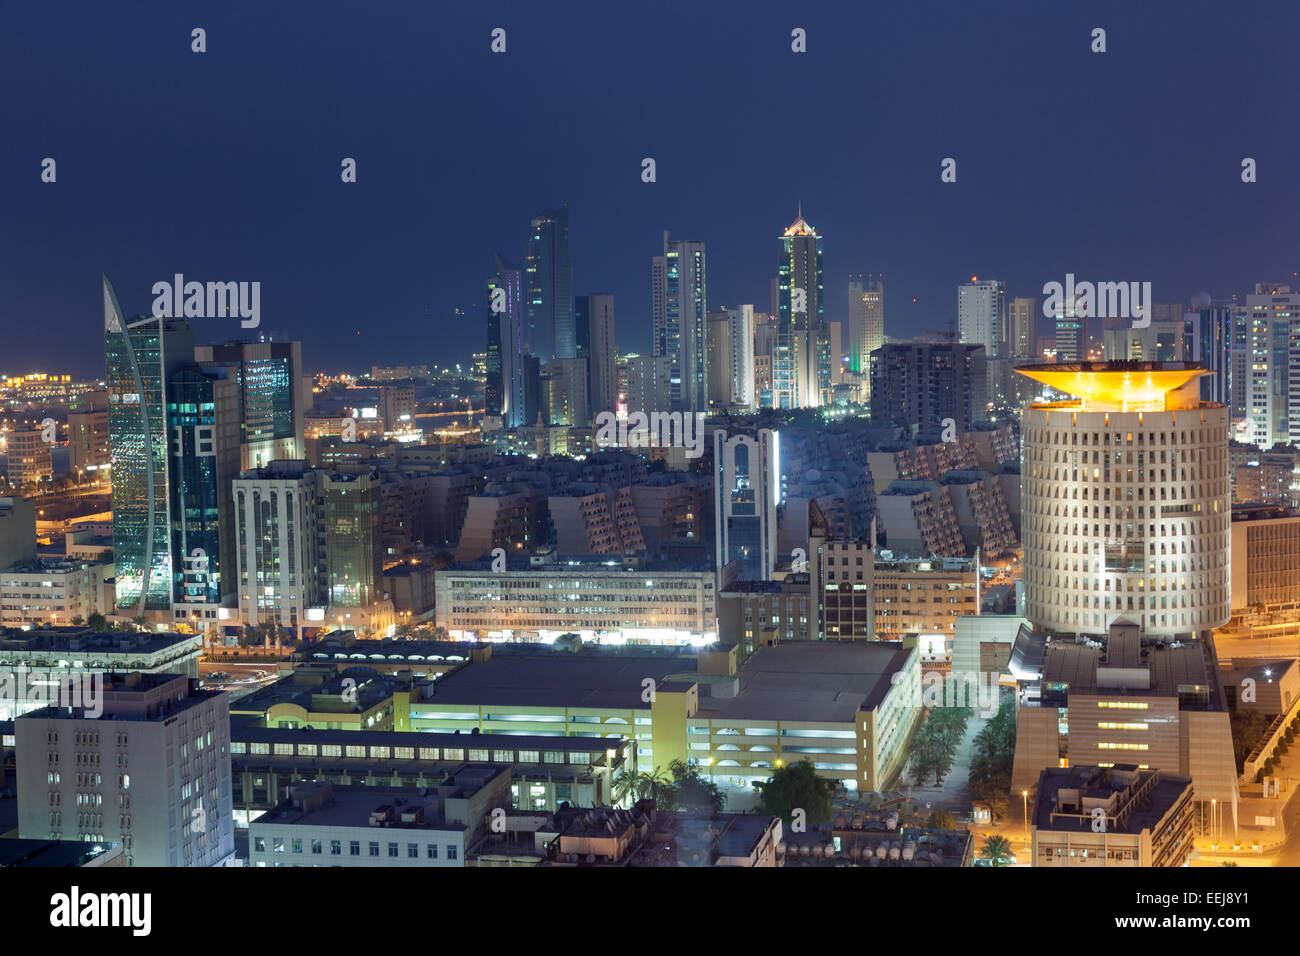 View of Kuwait City at night, Middle East Stock Photo